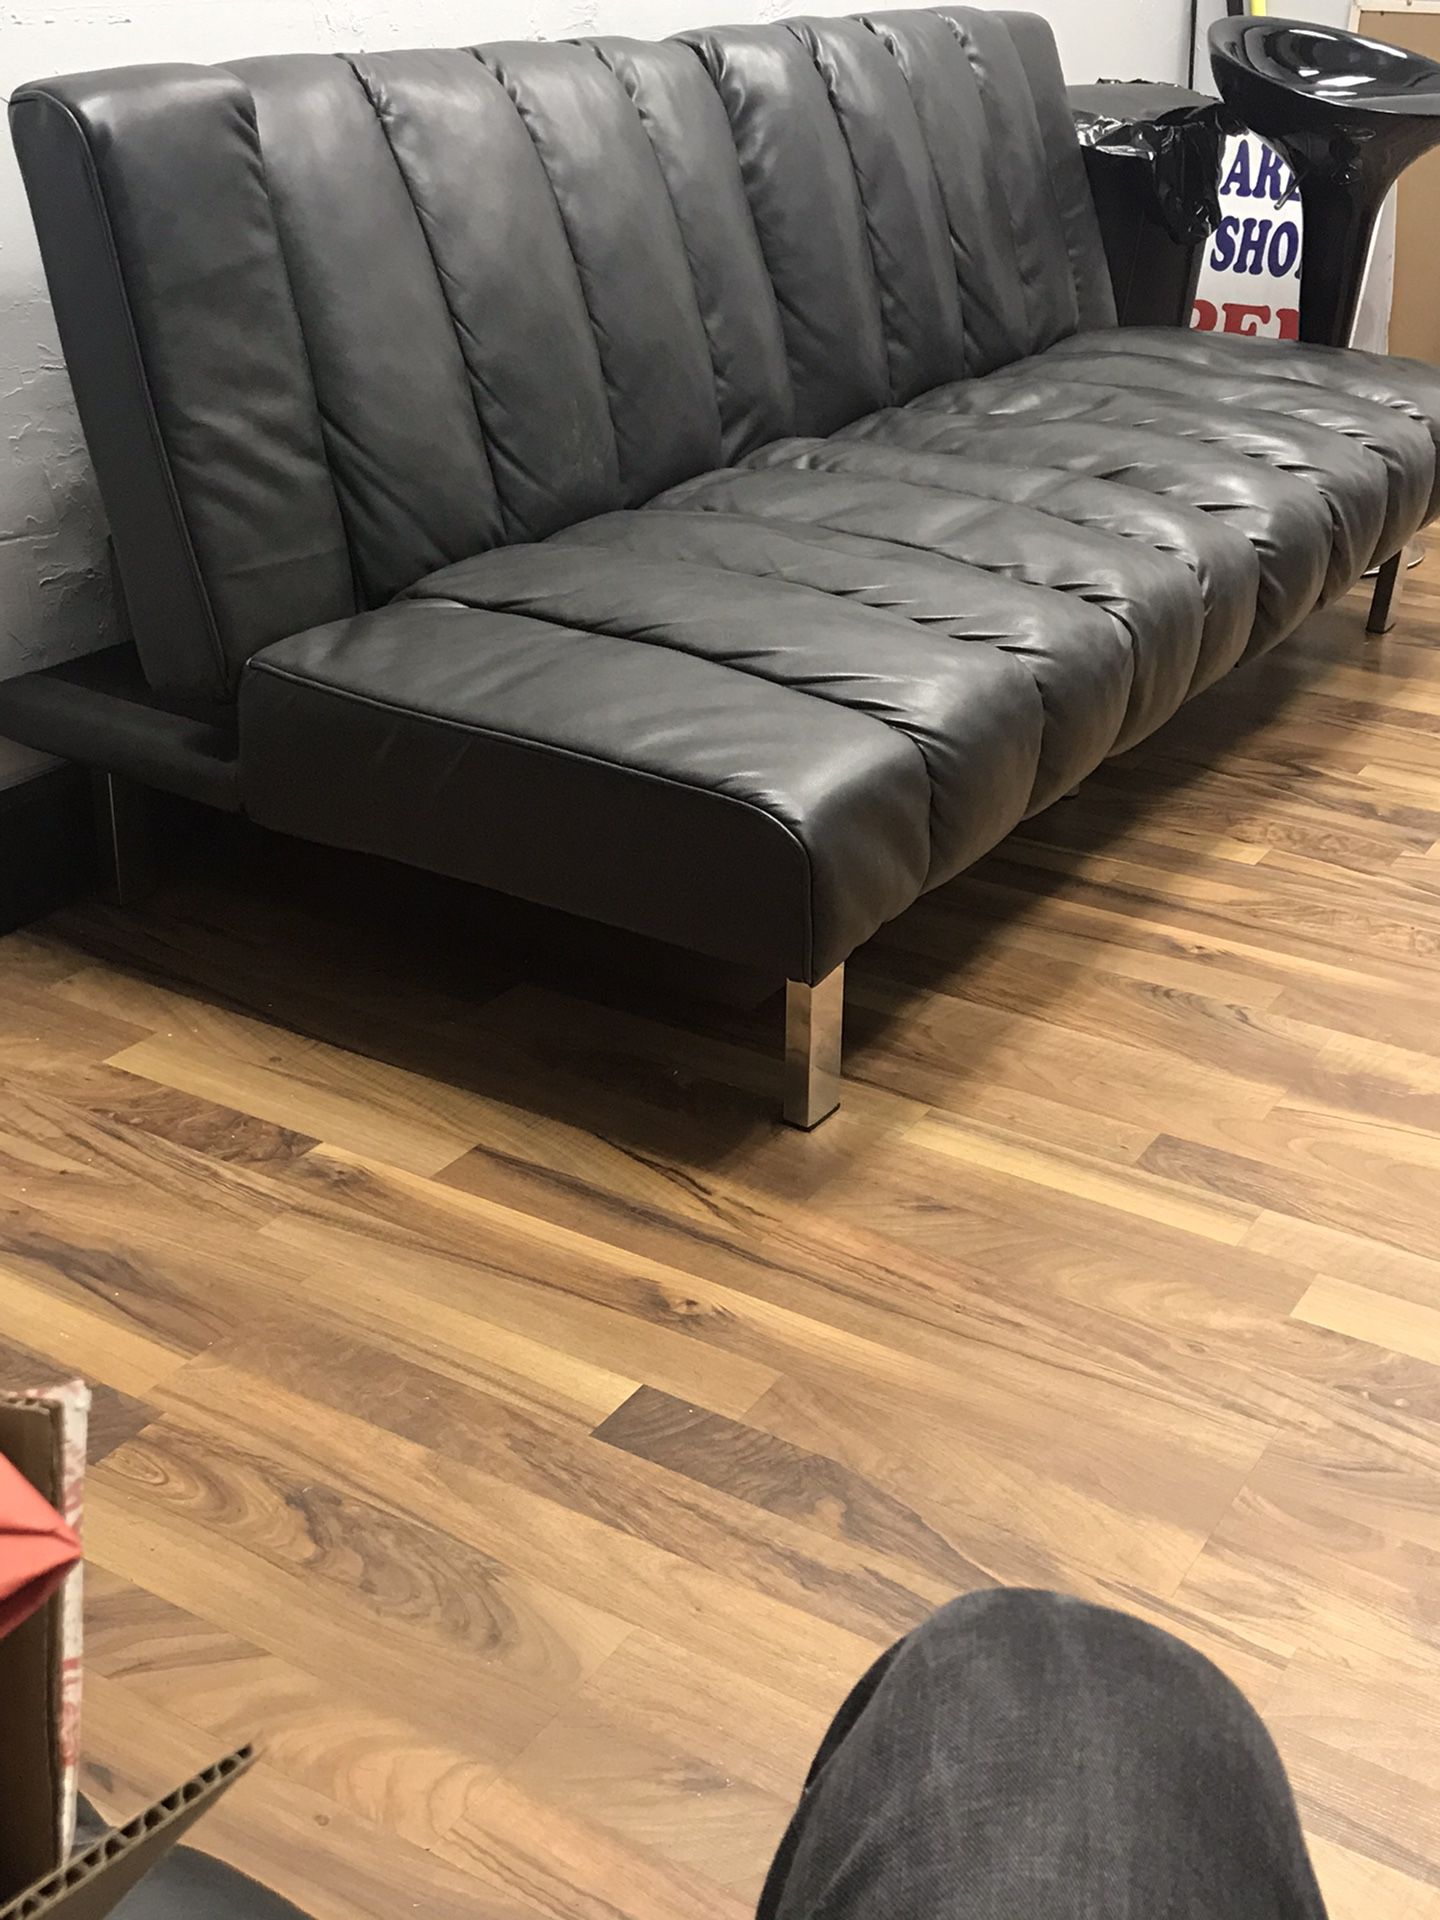 Leather futons